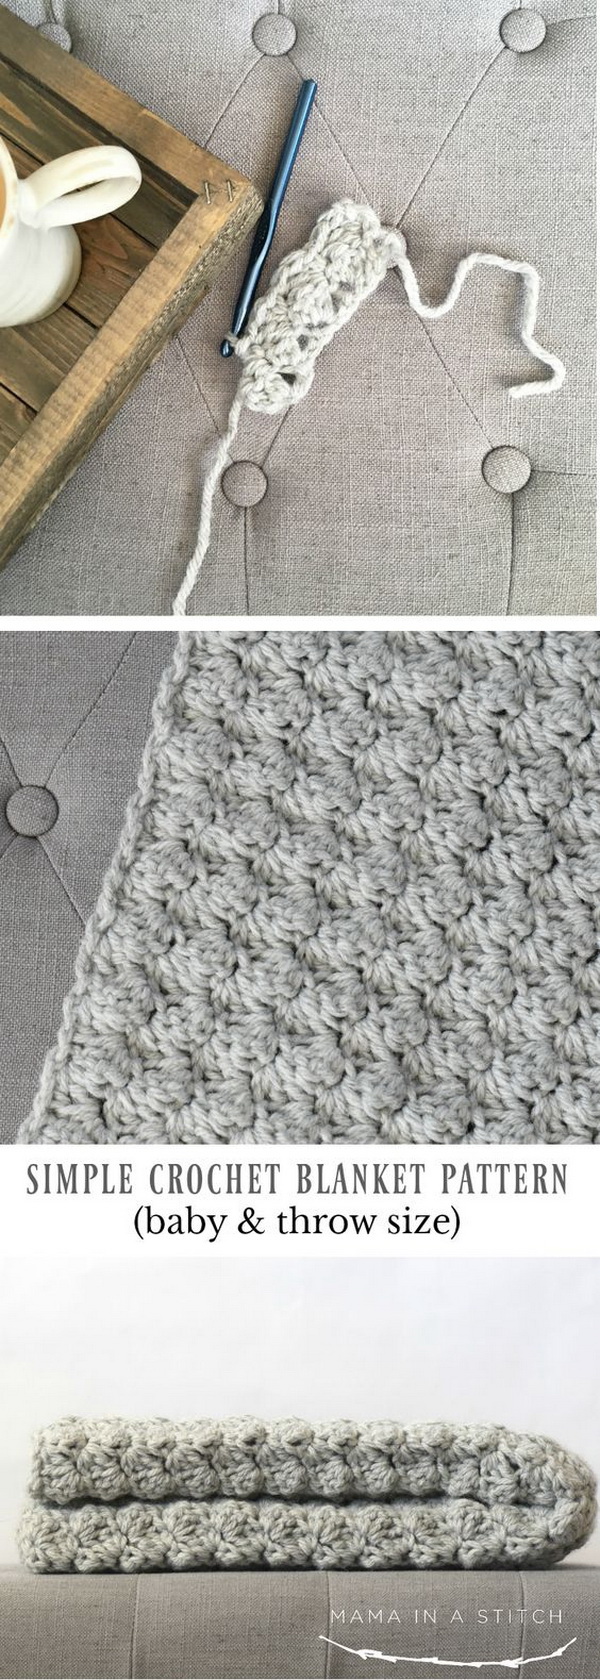 Quick And Easy Crochet Blanket Patterns For Beginners: Simple Crocheted Blanket Go To Pattern. 